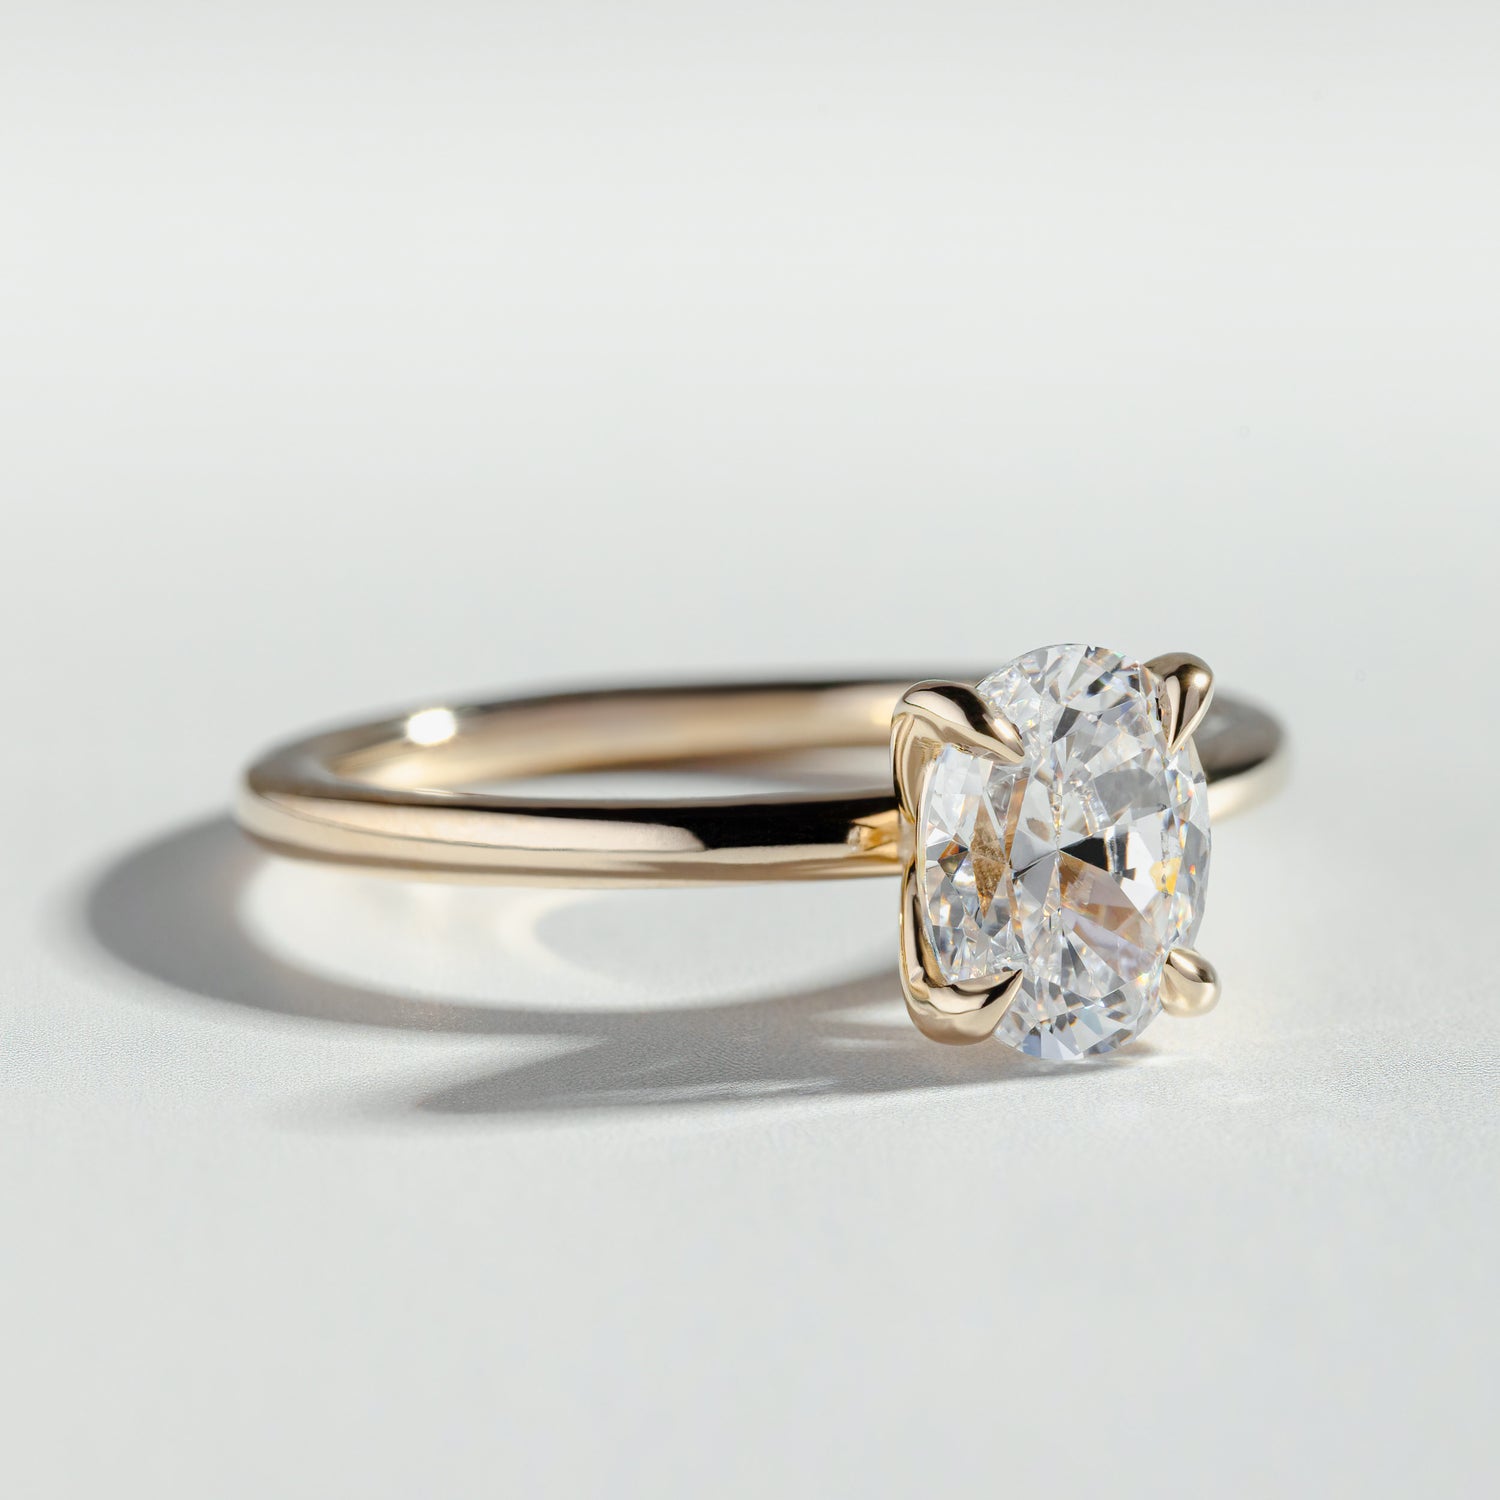 The Oval Cut Classic Diamond Ring | Atelier RMR Montreal | Engagement Ring